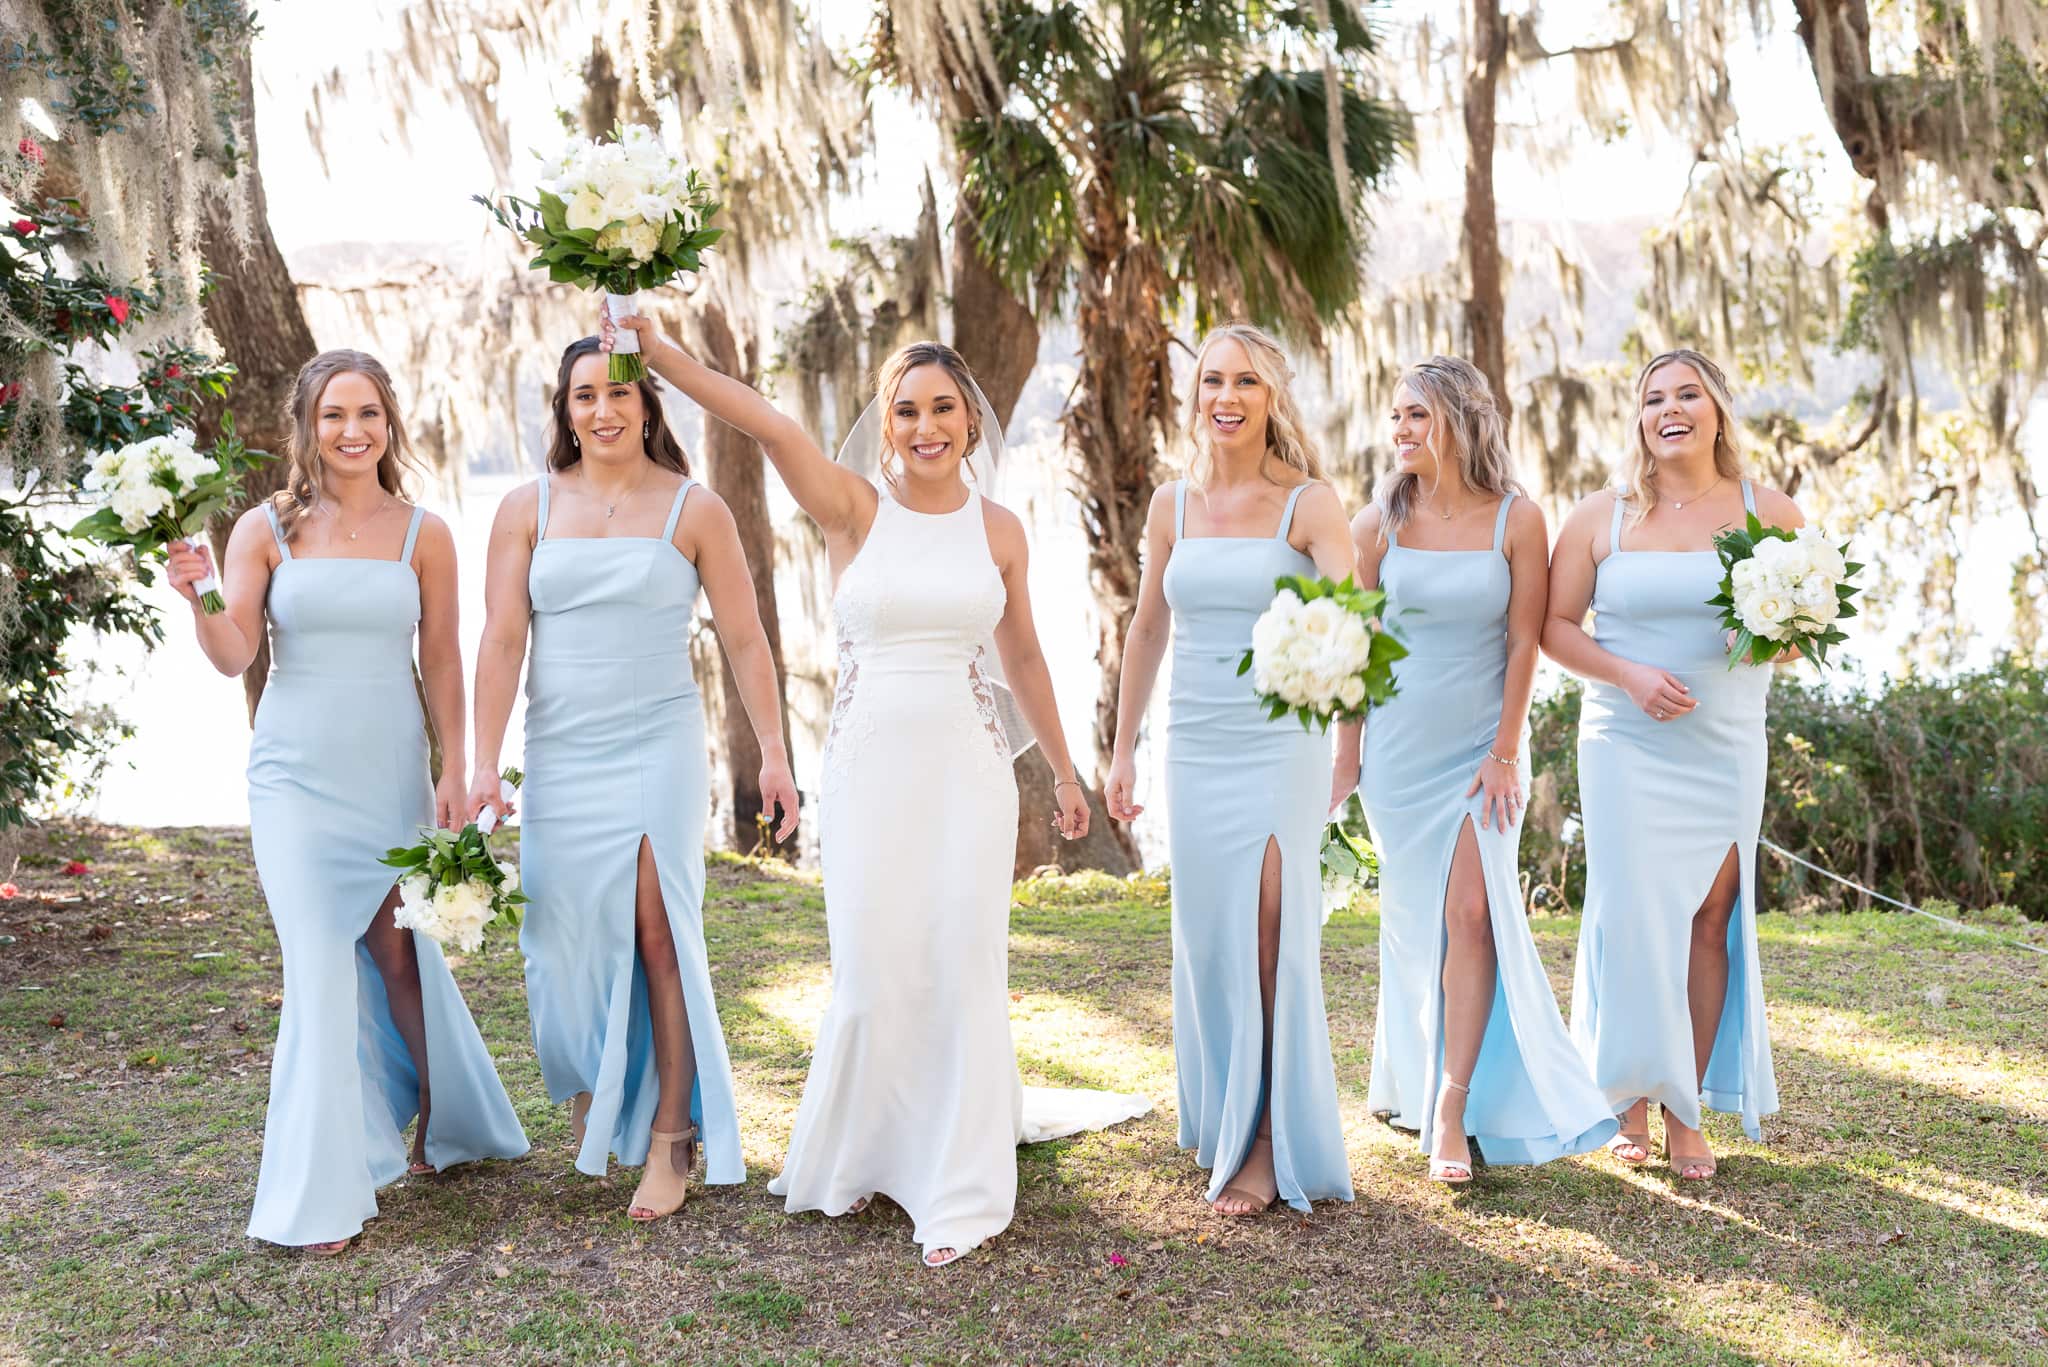 Pictures with the bride and bridesmaids before the ceremony - Kimbels at Wachesaw Plantation